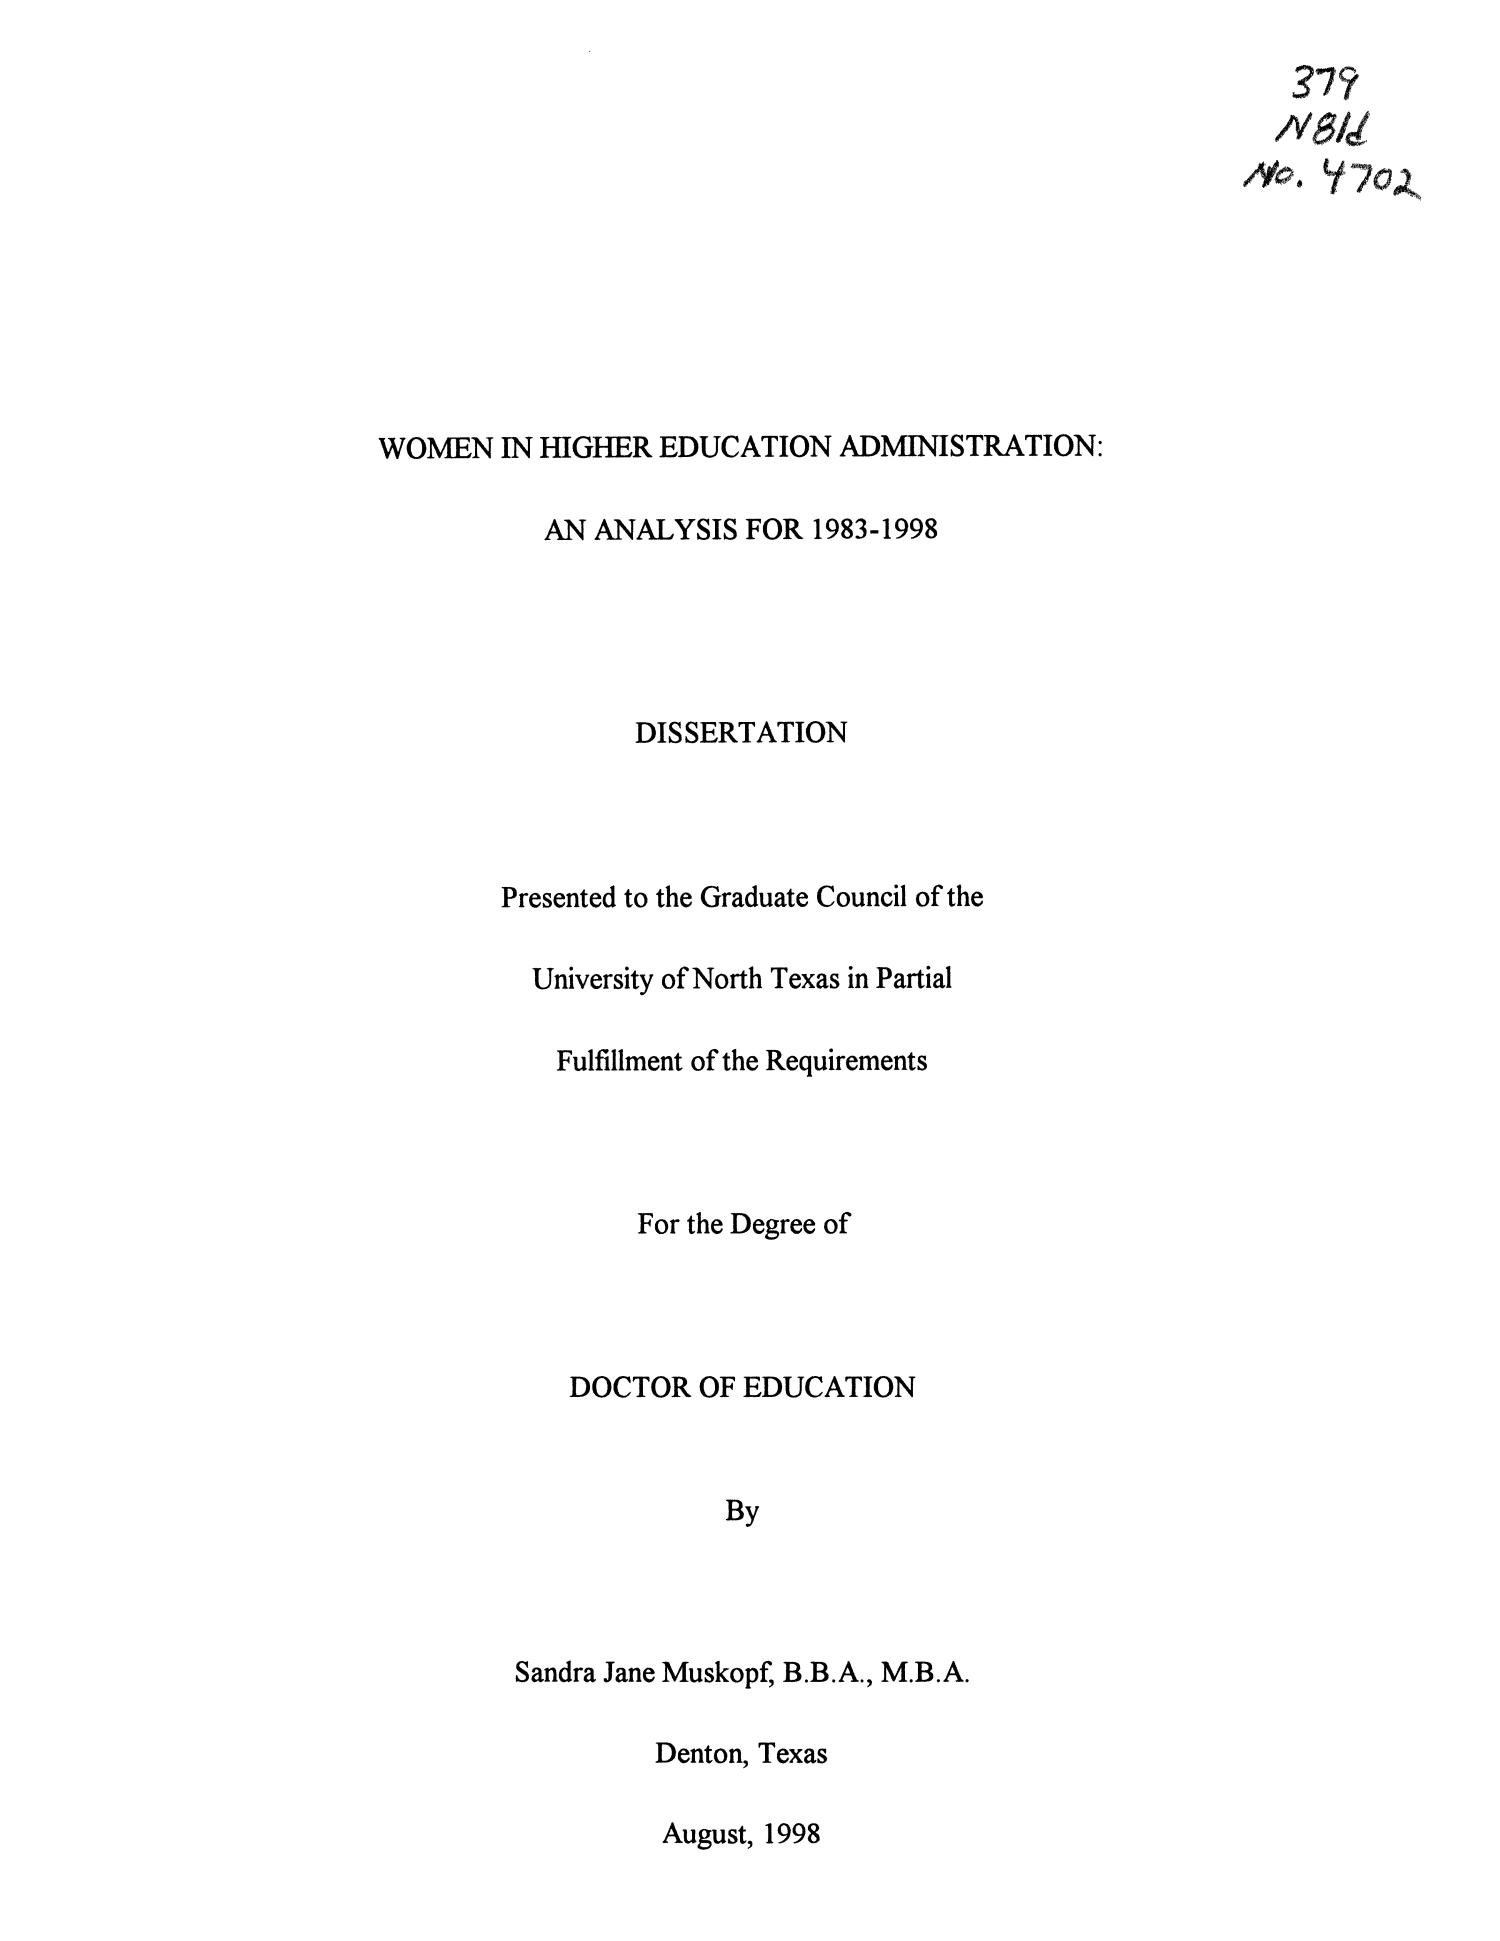 Women in Higher Education Administration: An Analysis for 1983-1998
                                                
                                                    Title Page
                                                